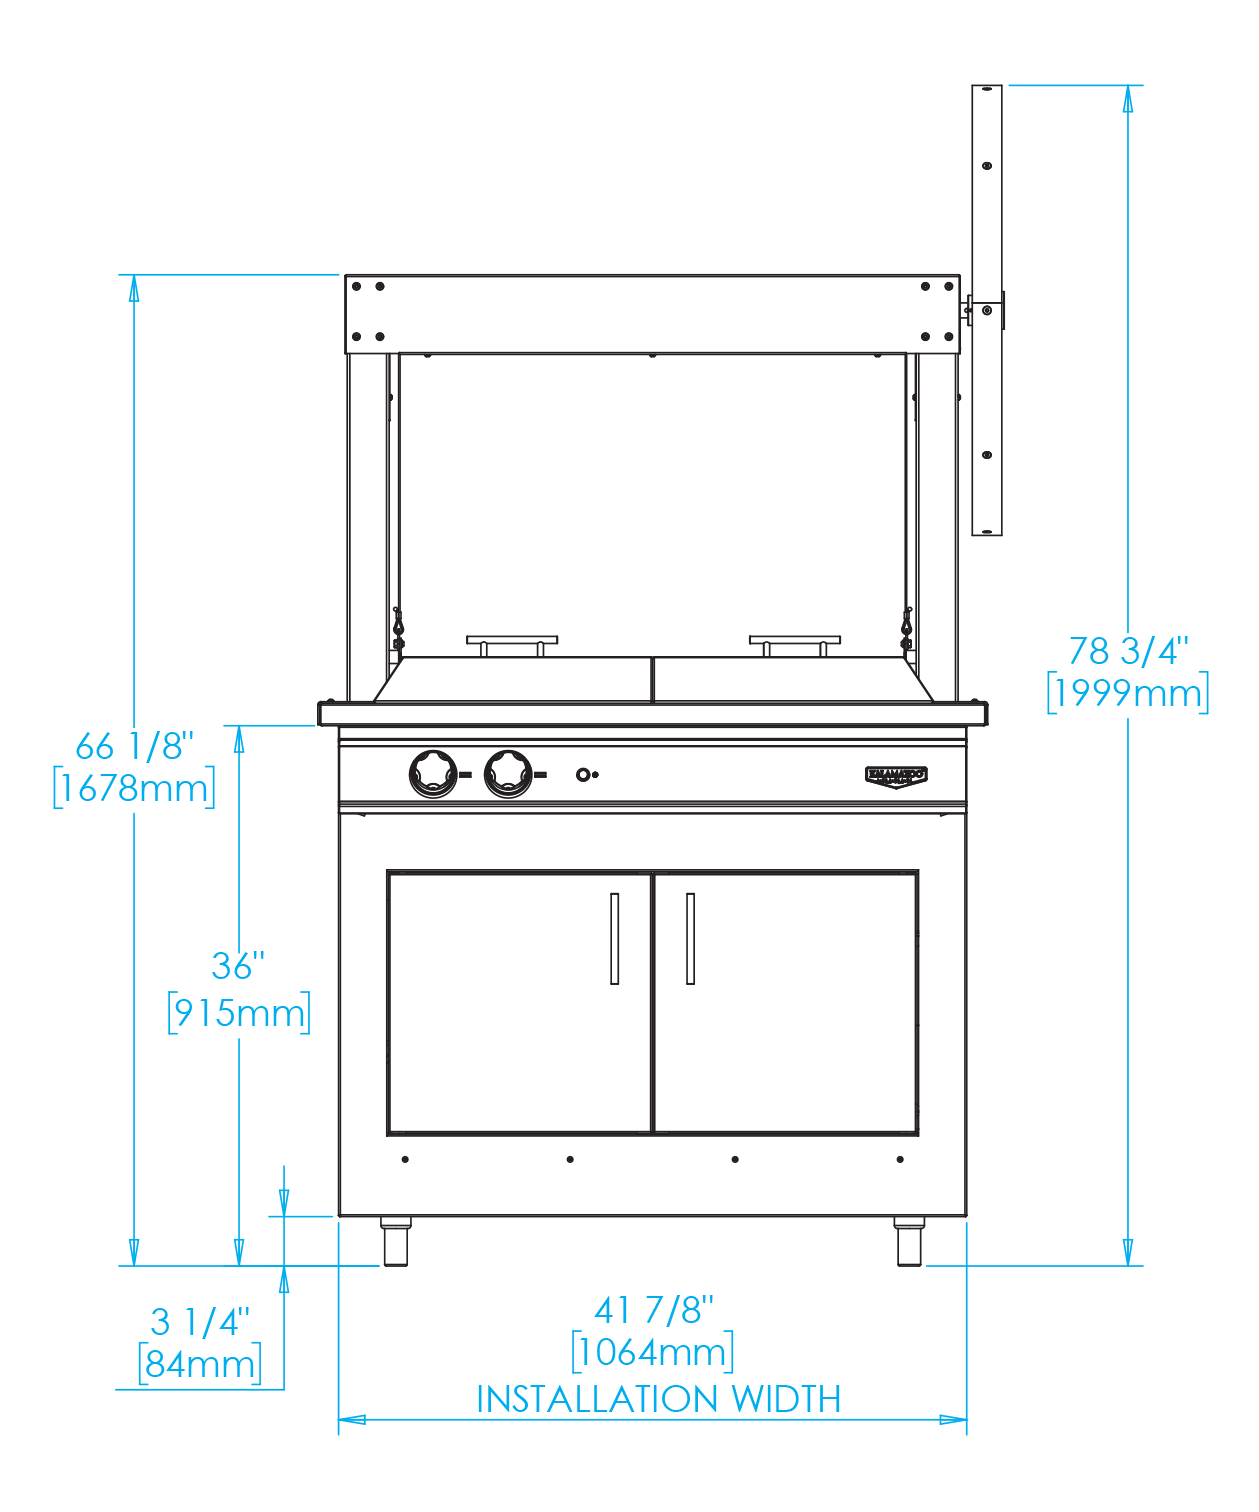 K750GB Built-in Gaucho Grill Dimensions Image